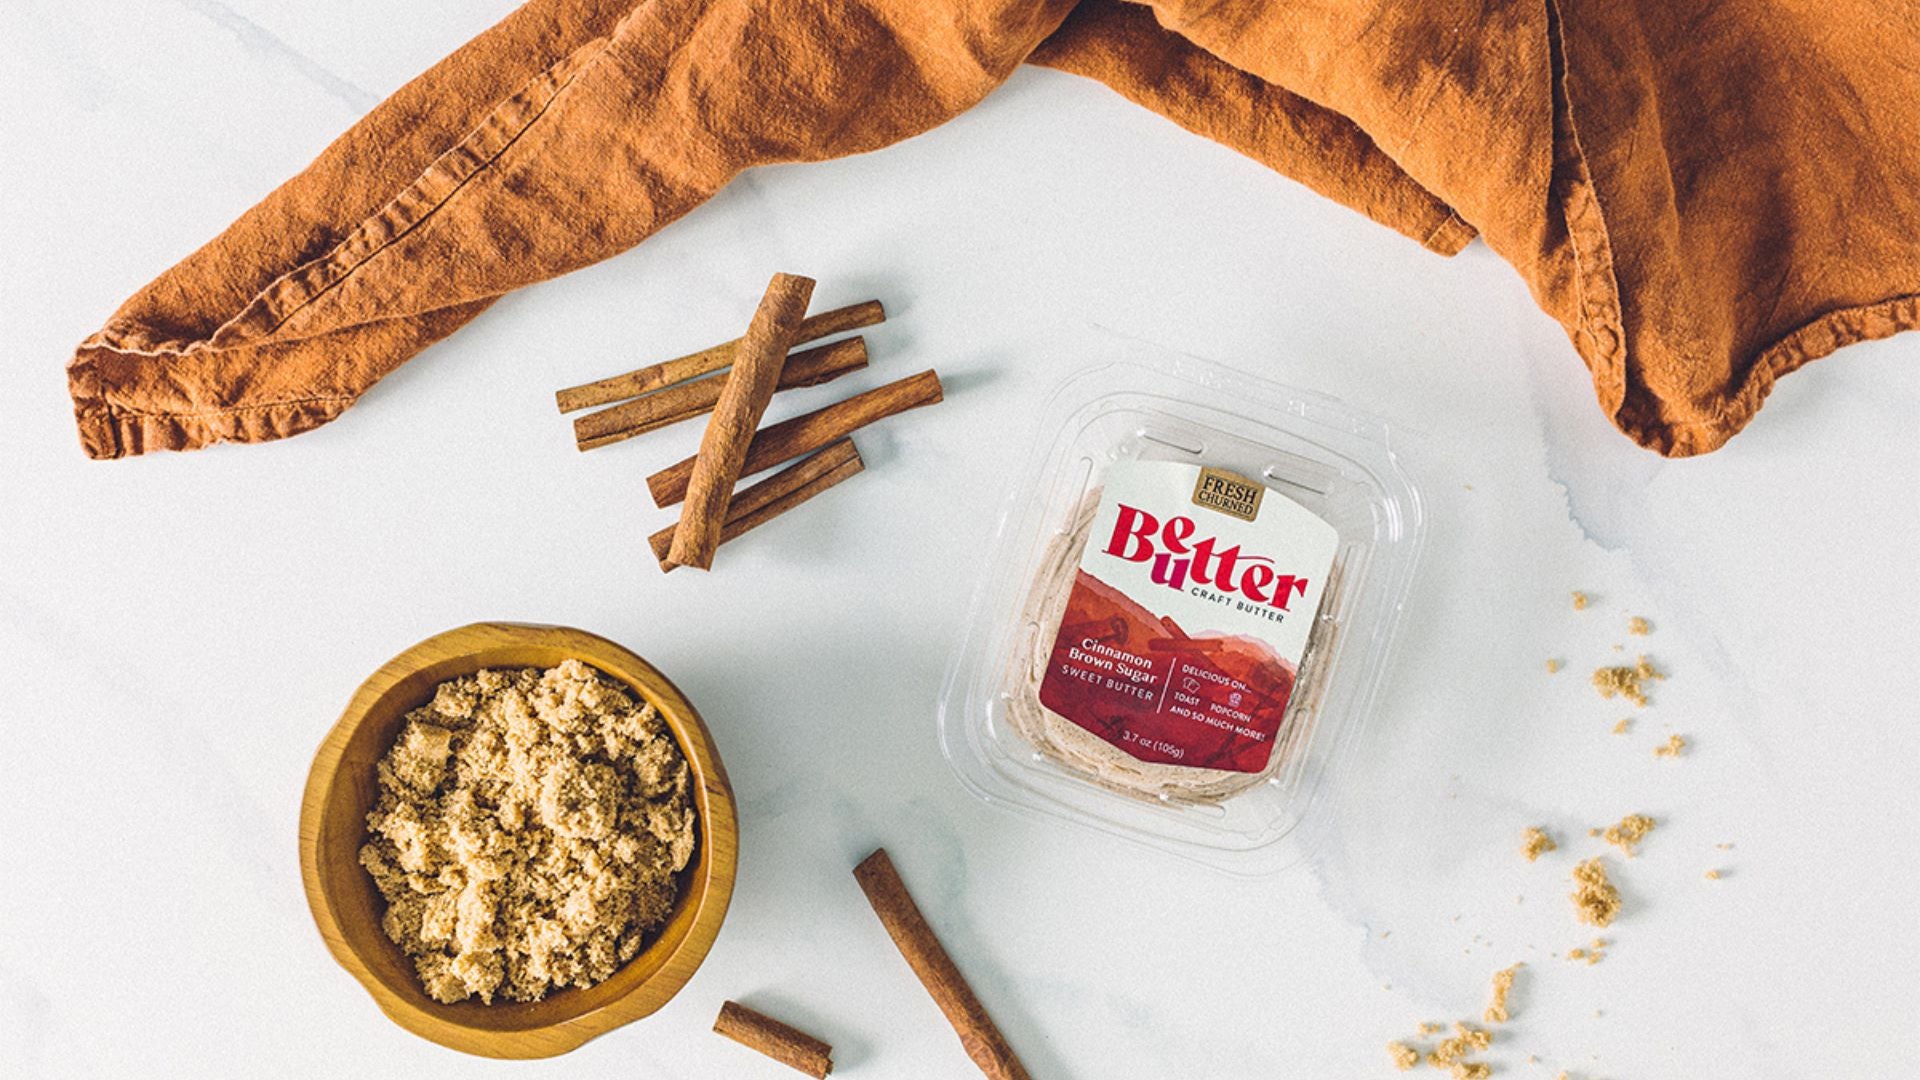 How Cinnamon Brown Sugar Butter Can Fit Into a Balanced Diet